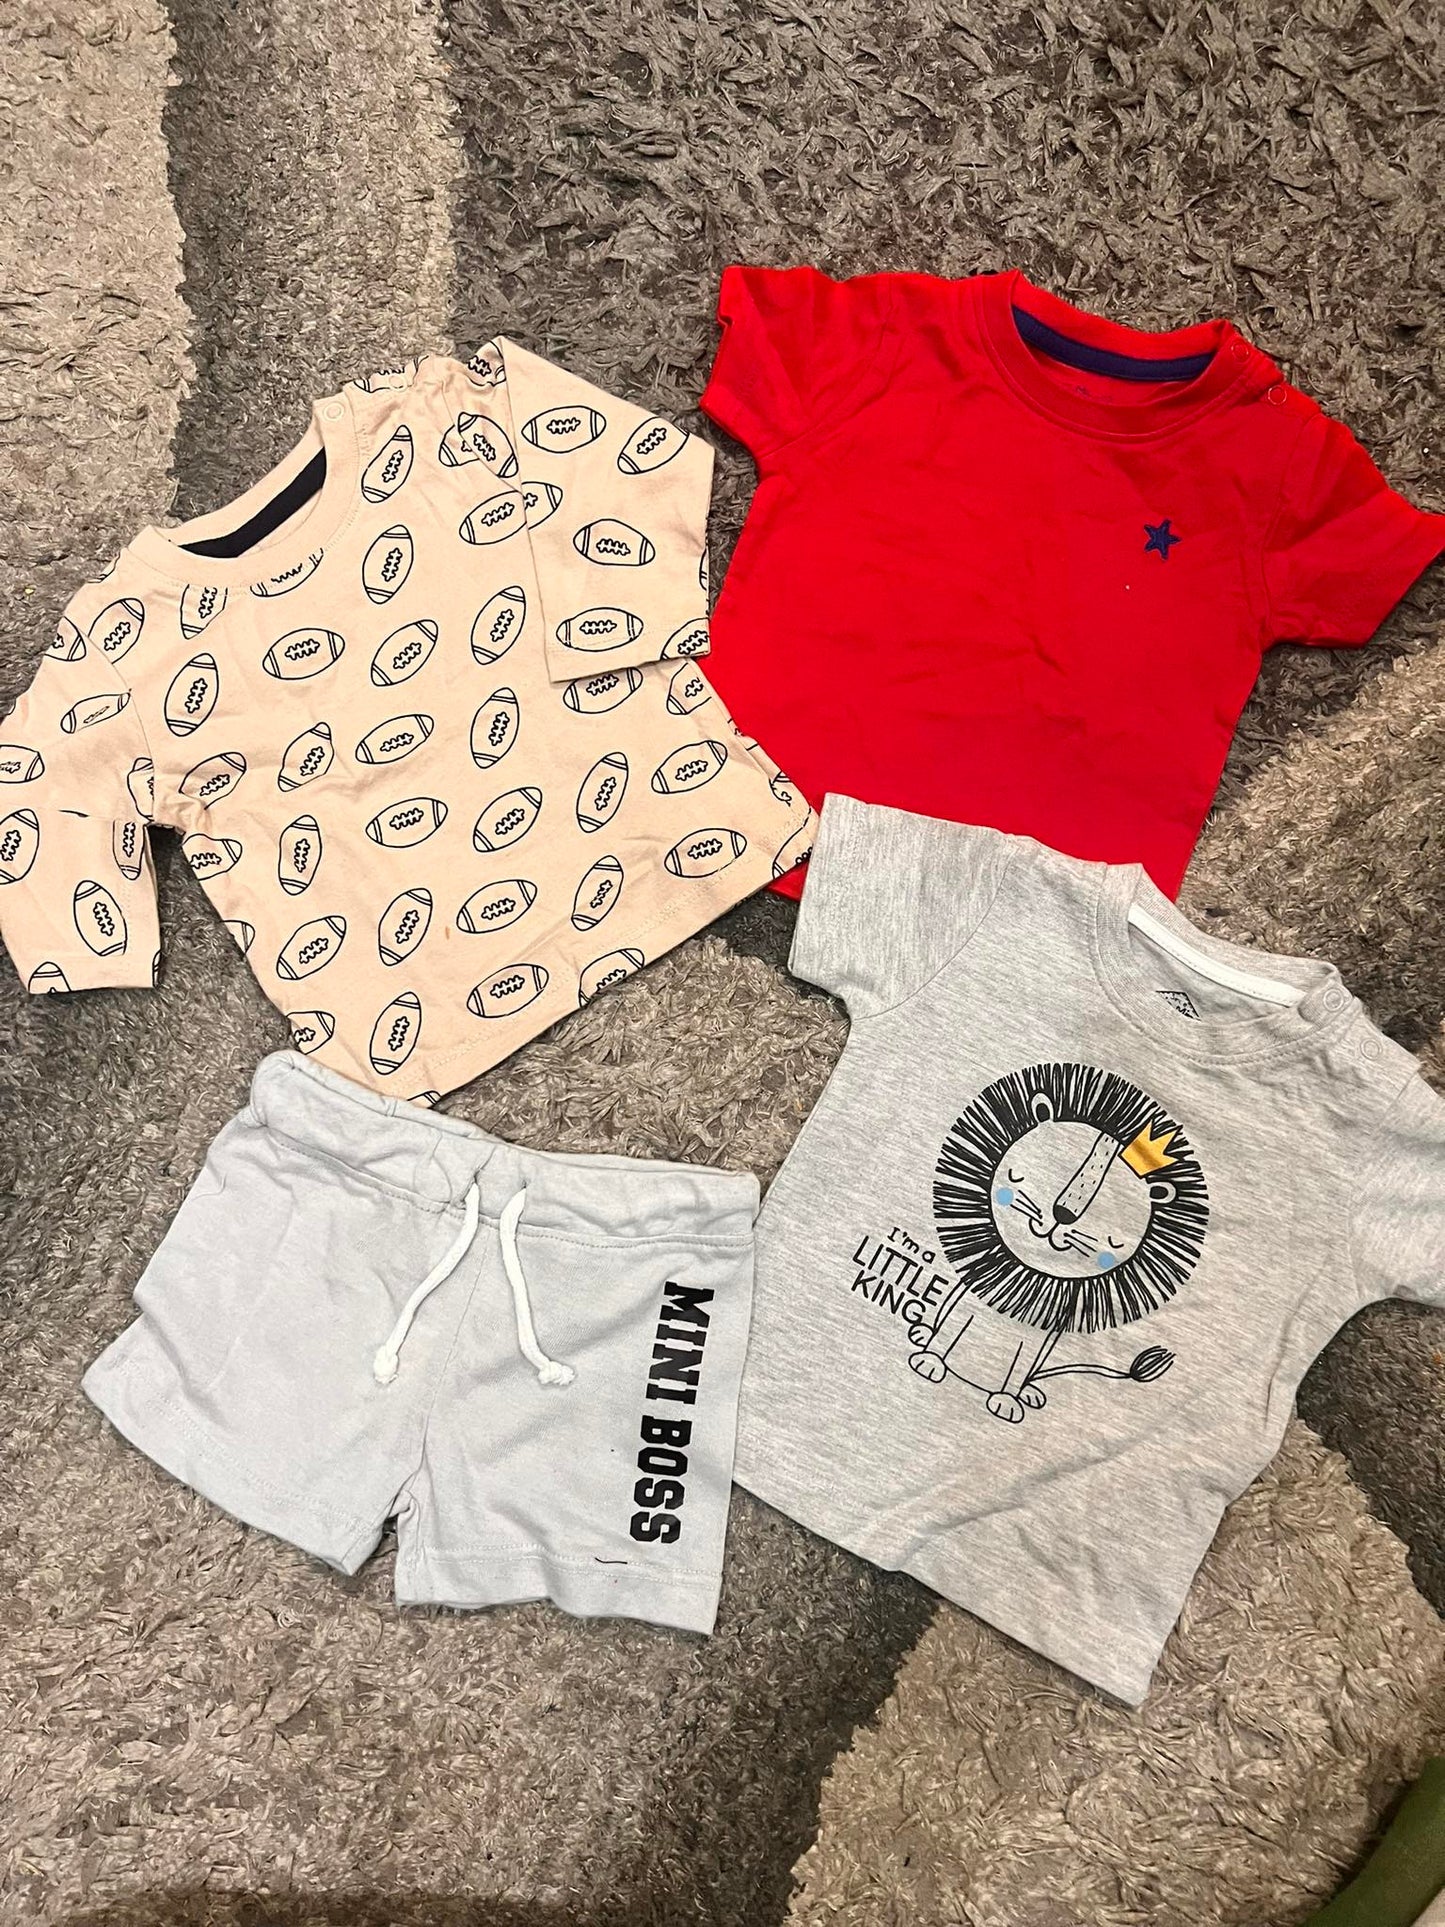 Kids Infant Boys Summer Sale Pack of 4 : 3 Shirts with One Short 0-3 Months